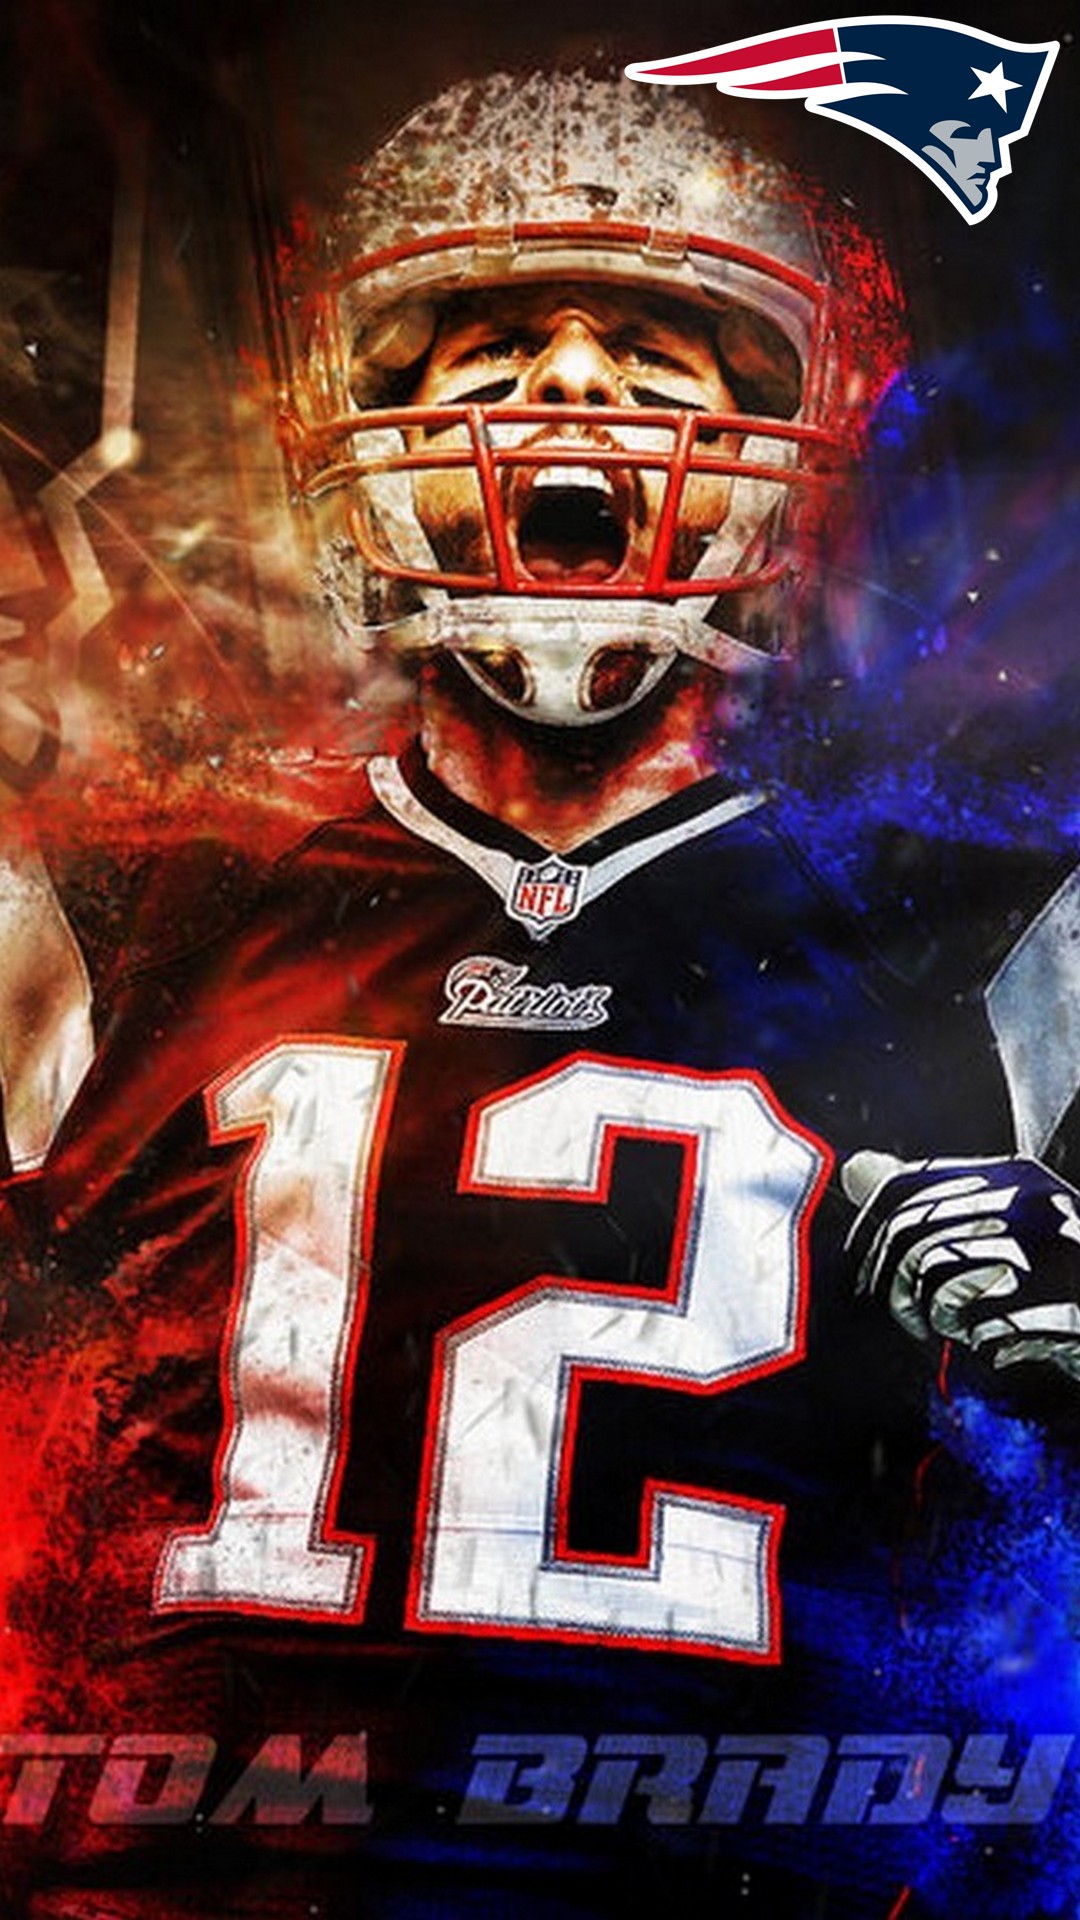 iPhone Wallpaper HD Tom Brady Super Bowl With Resolution 1080X1920 pixel. You can make this wallpaper for your Mac or Windows Desktop Background, iPhone, Android or Tablet and another Smartphone device for free